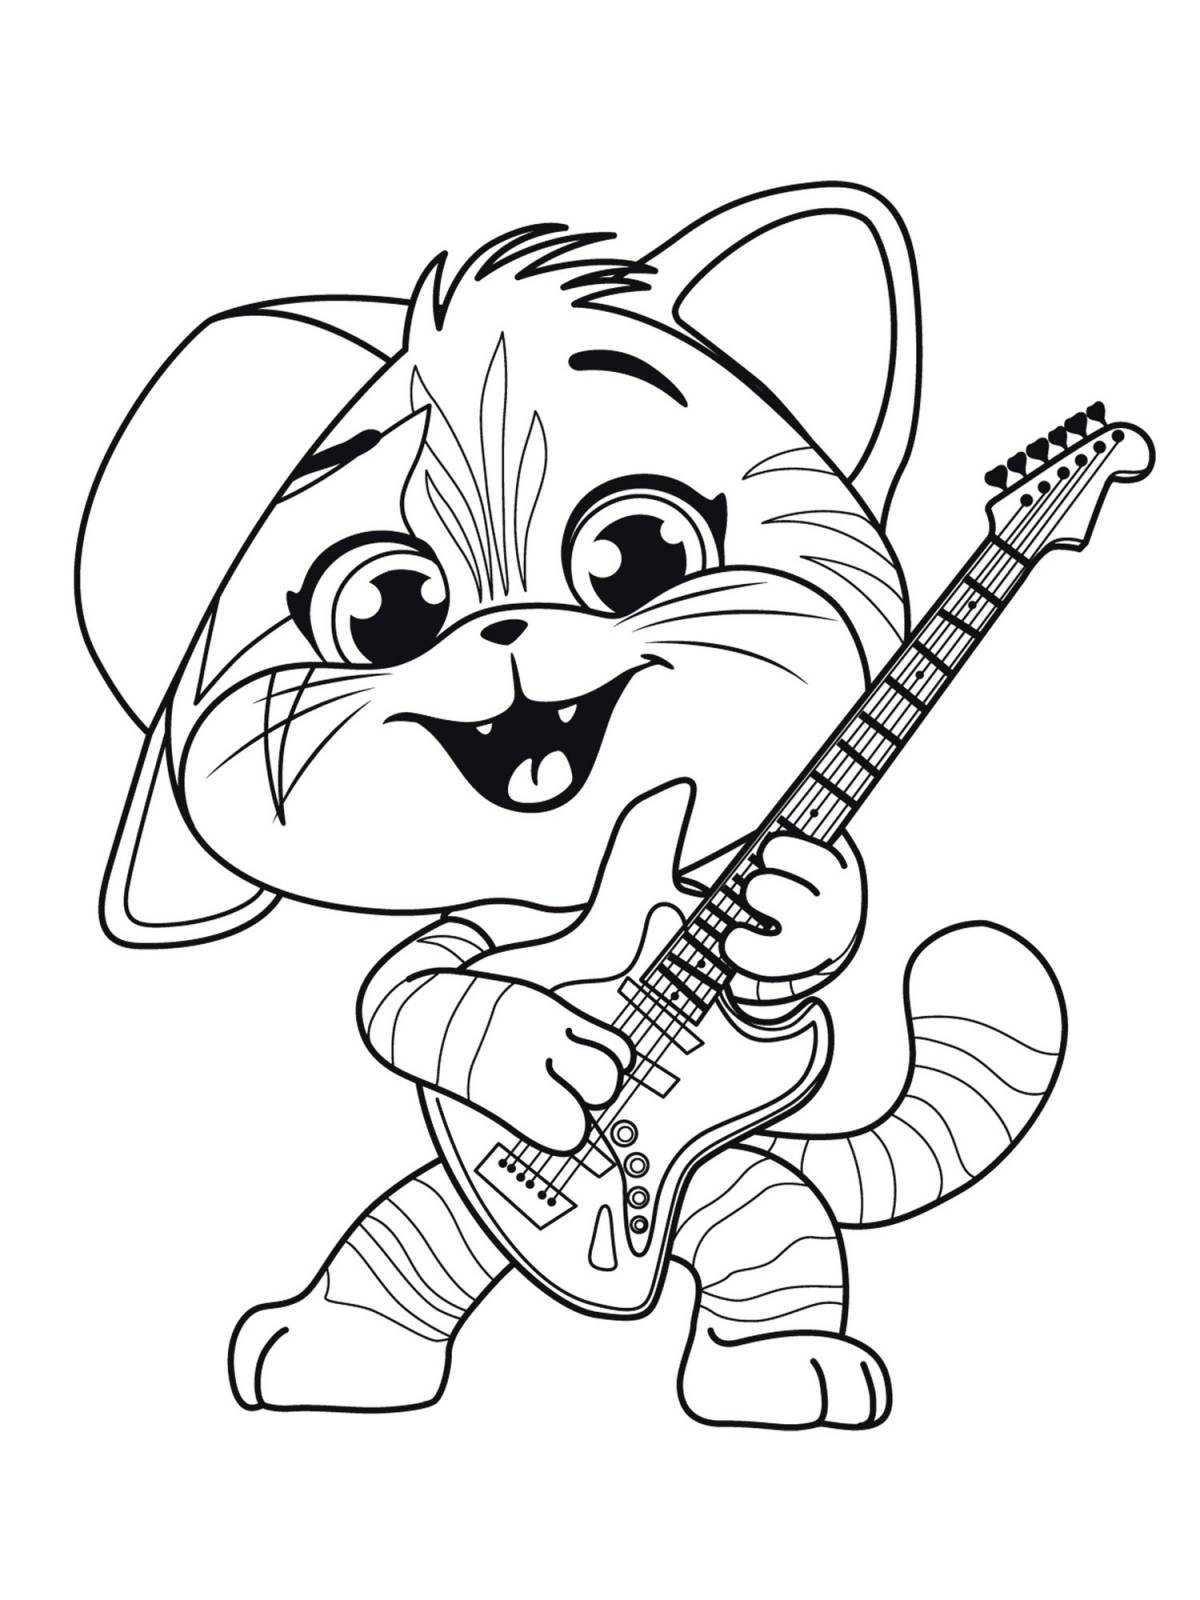 Little kittens coloring page